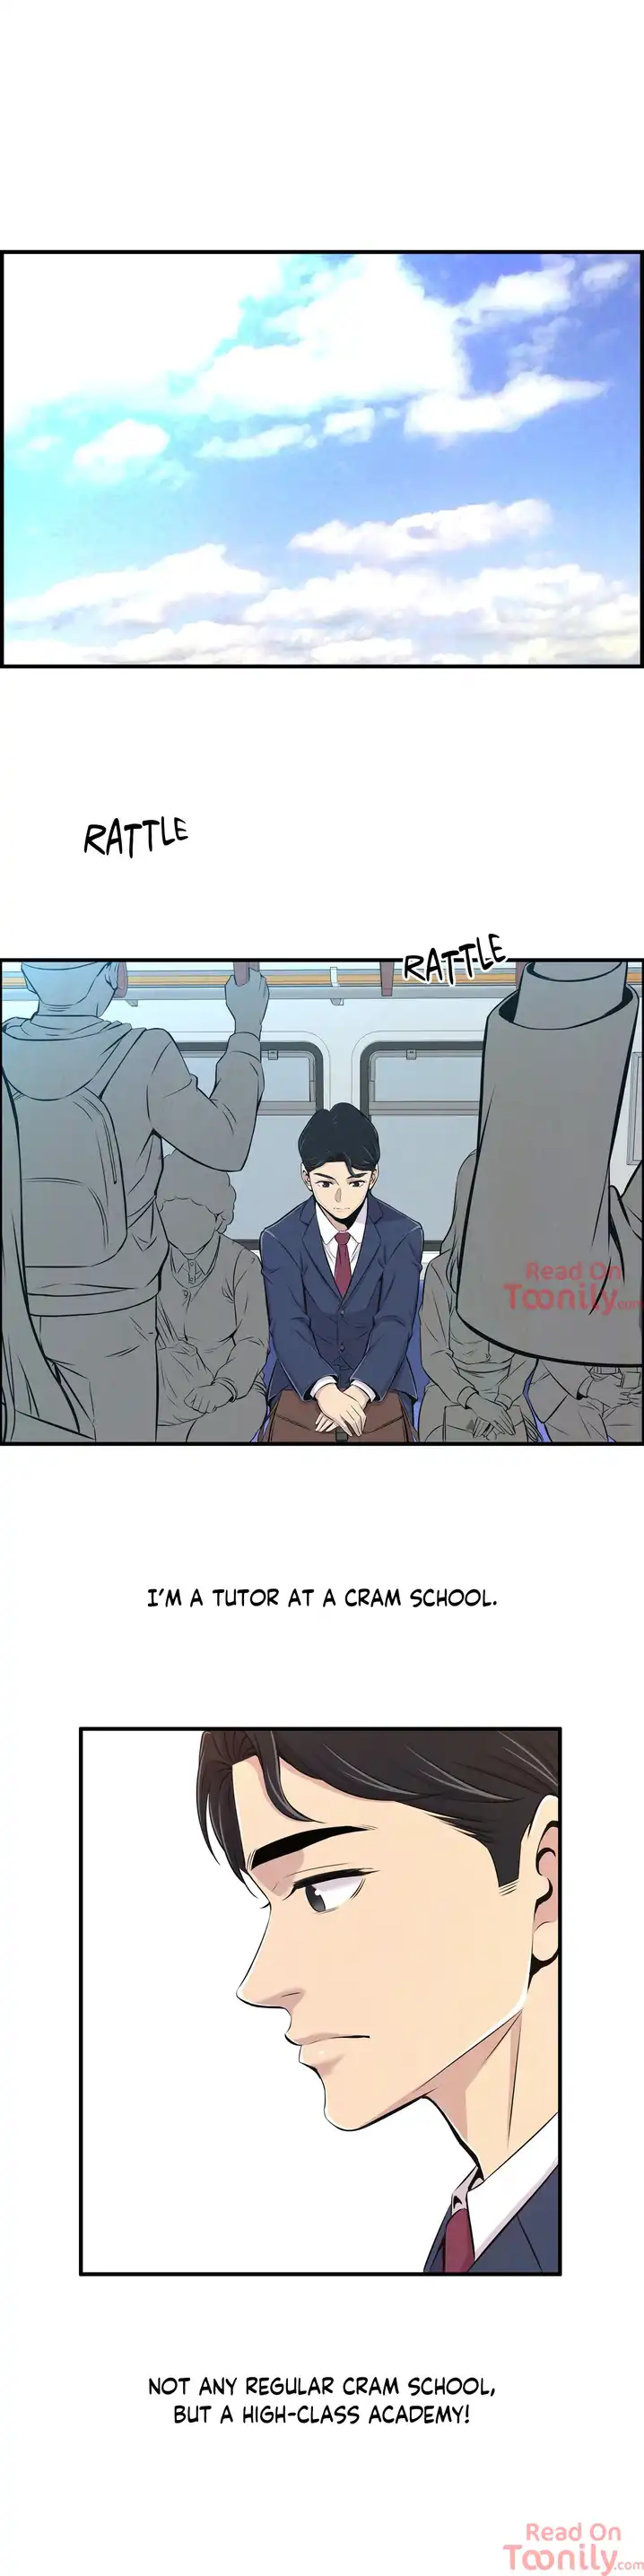 Cram School Scandal - Chapter 1 Page 2